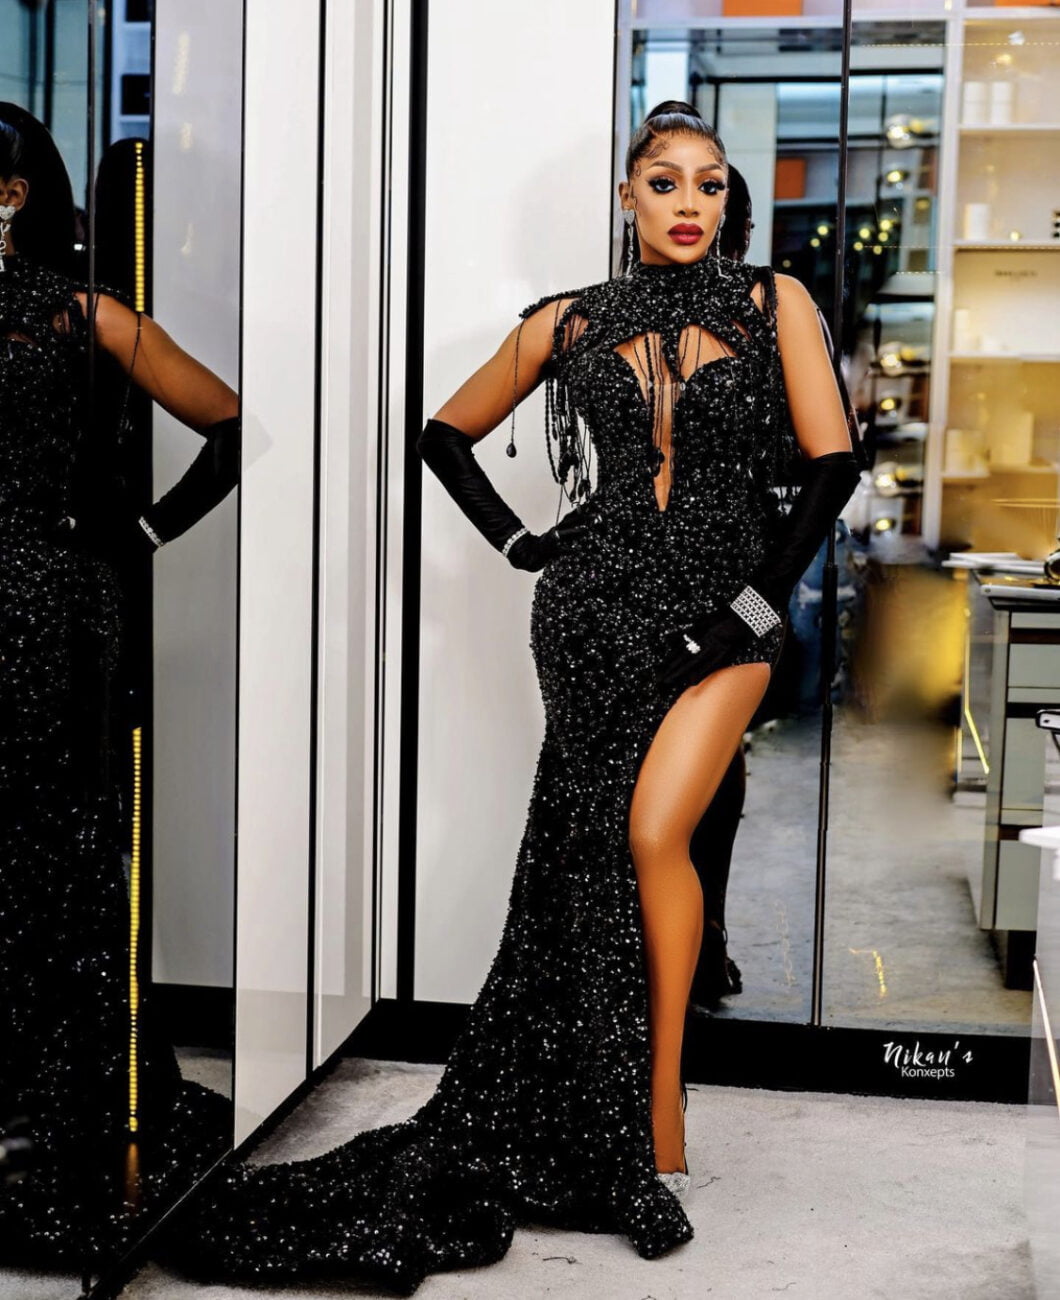 Chioma Good Hair in a bedazzled black dress with matching gloves.